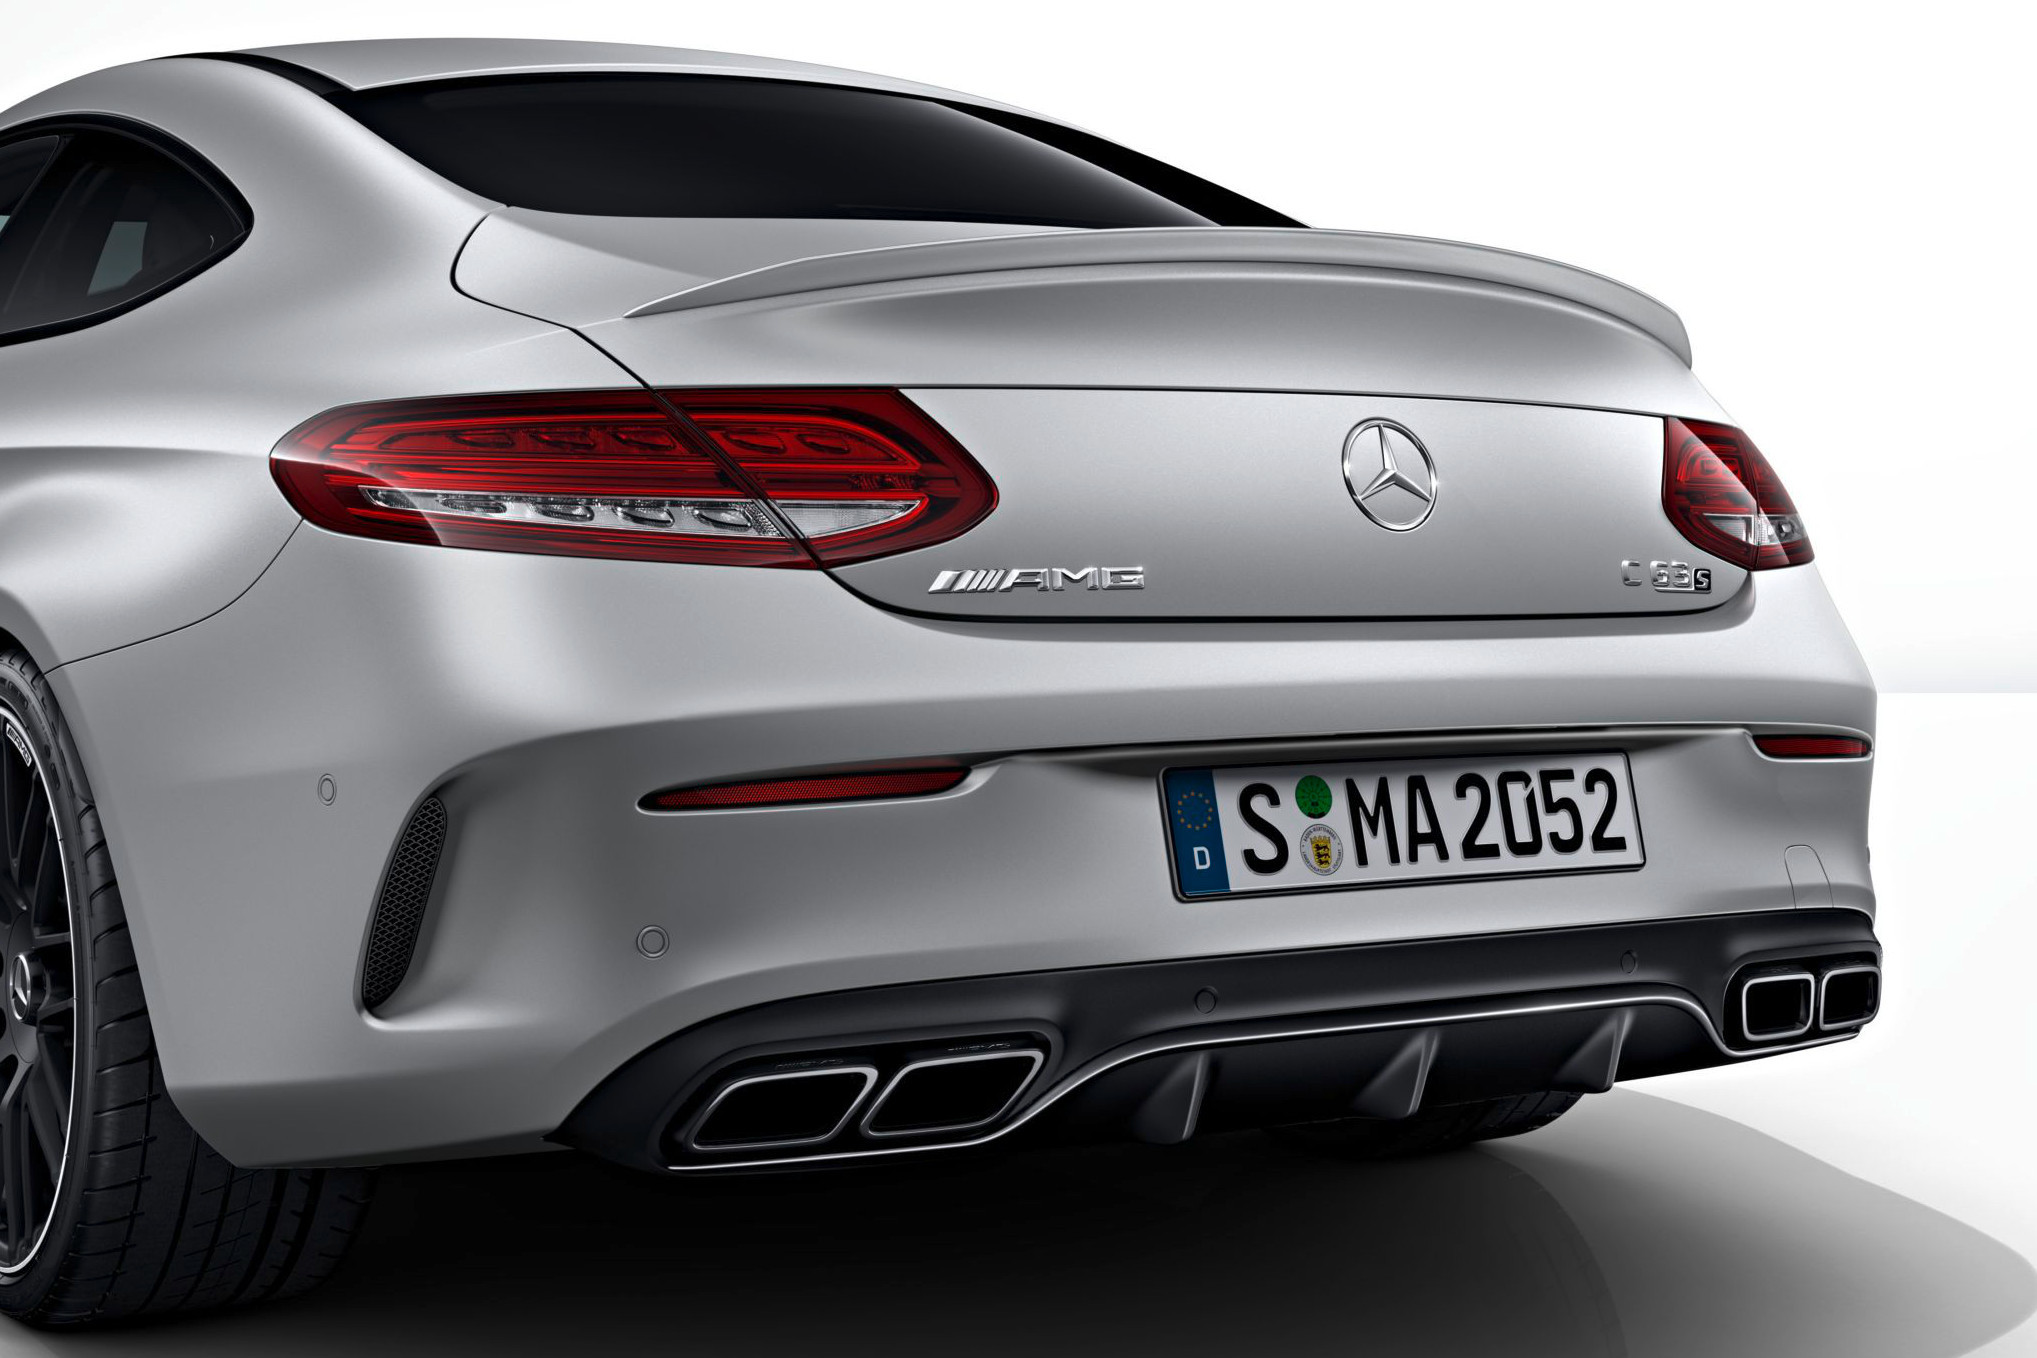 Night Package For Mercedes-AMG C63 Coupe Introduced